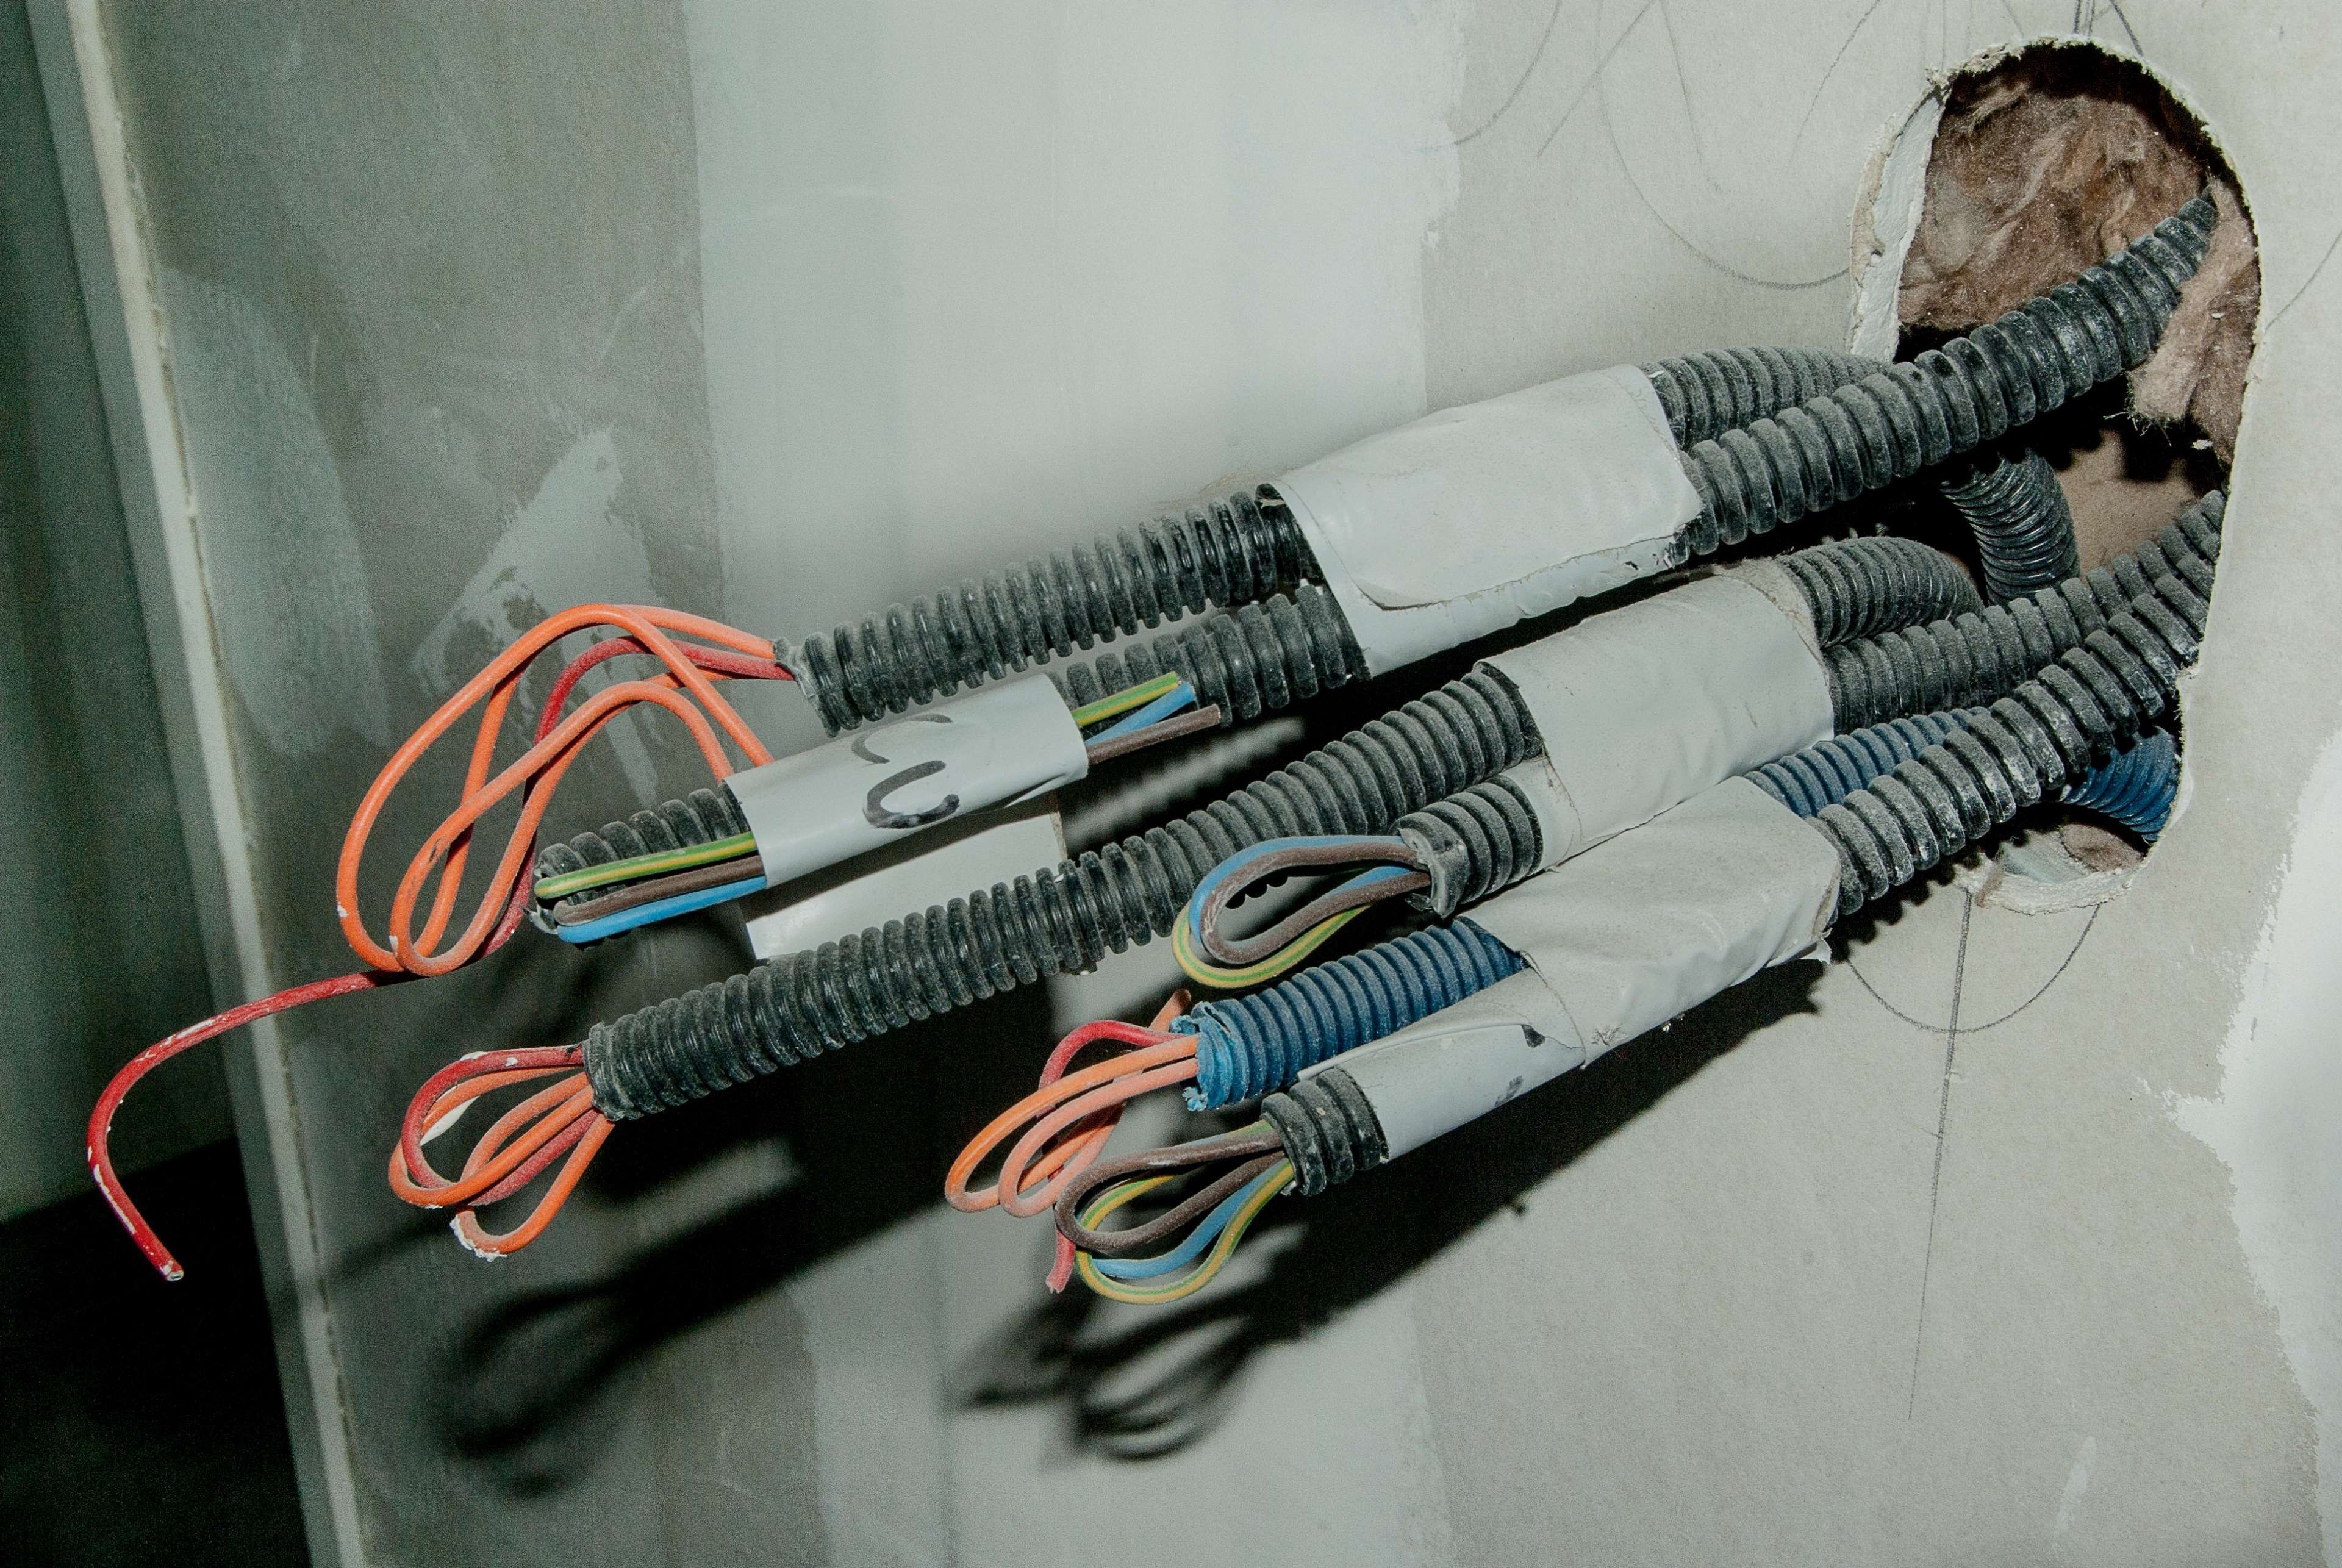 cables #connection #electric wires #electrician #electricity. Security camera hidden, Electrical connection, Wireless home security systems